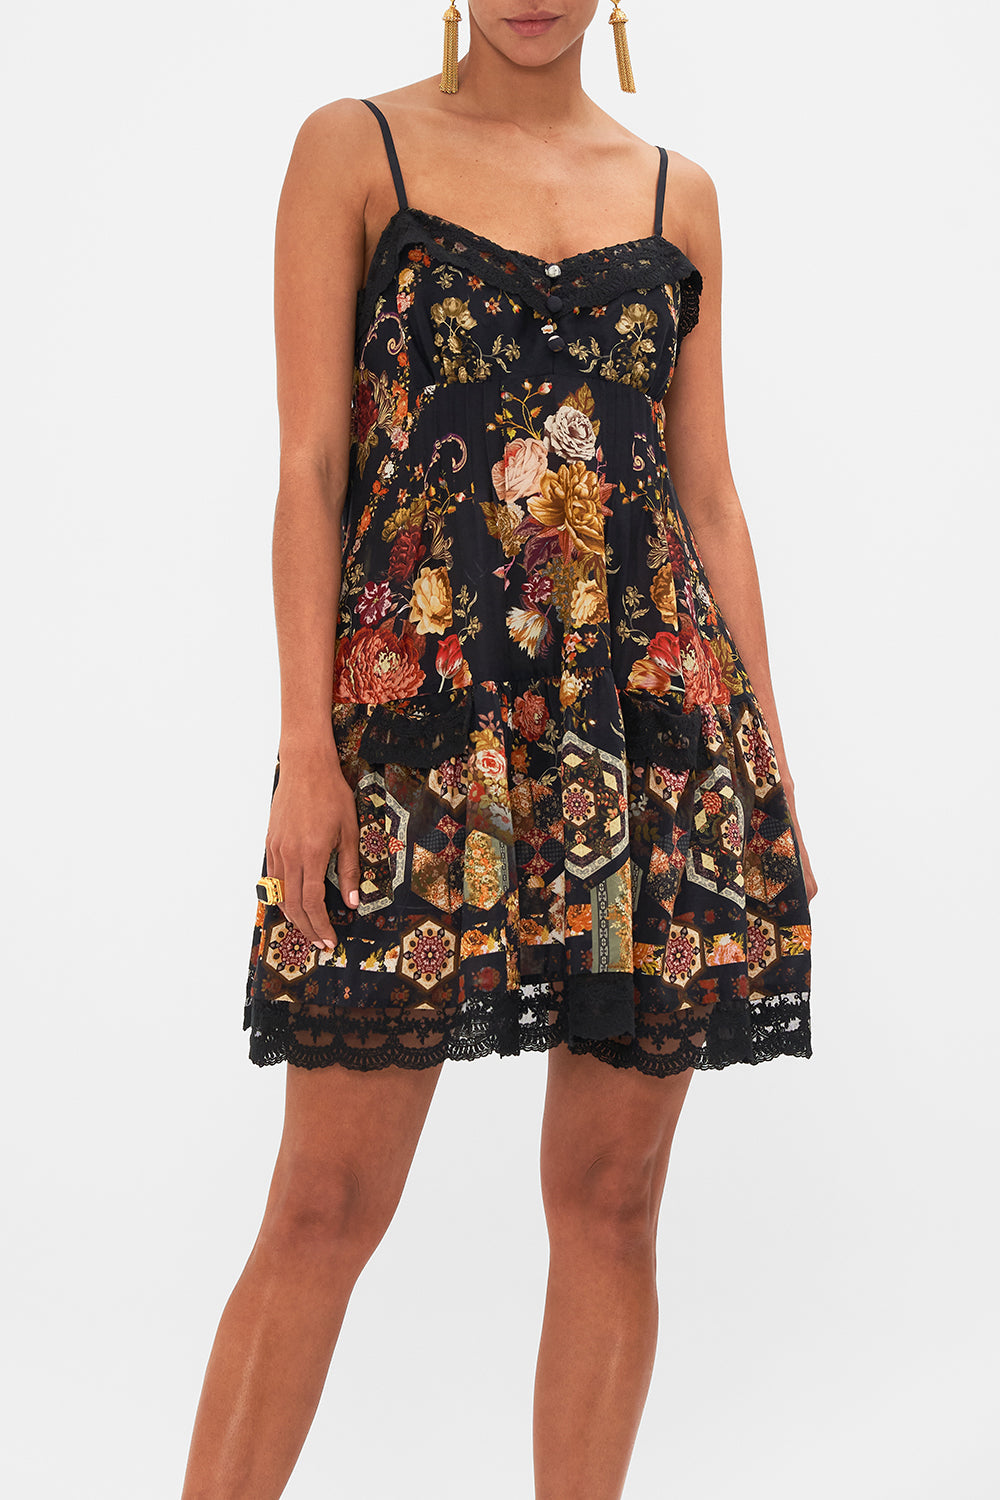 CAMILLA Floral Short Pintuck Dress with Pockets in Stitched in Time print